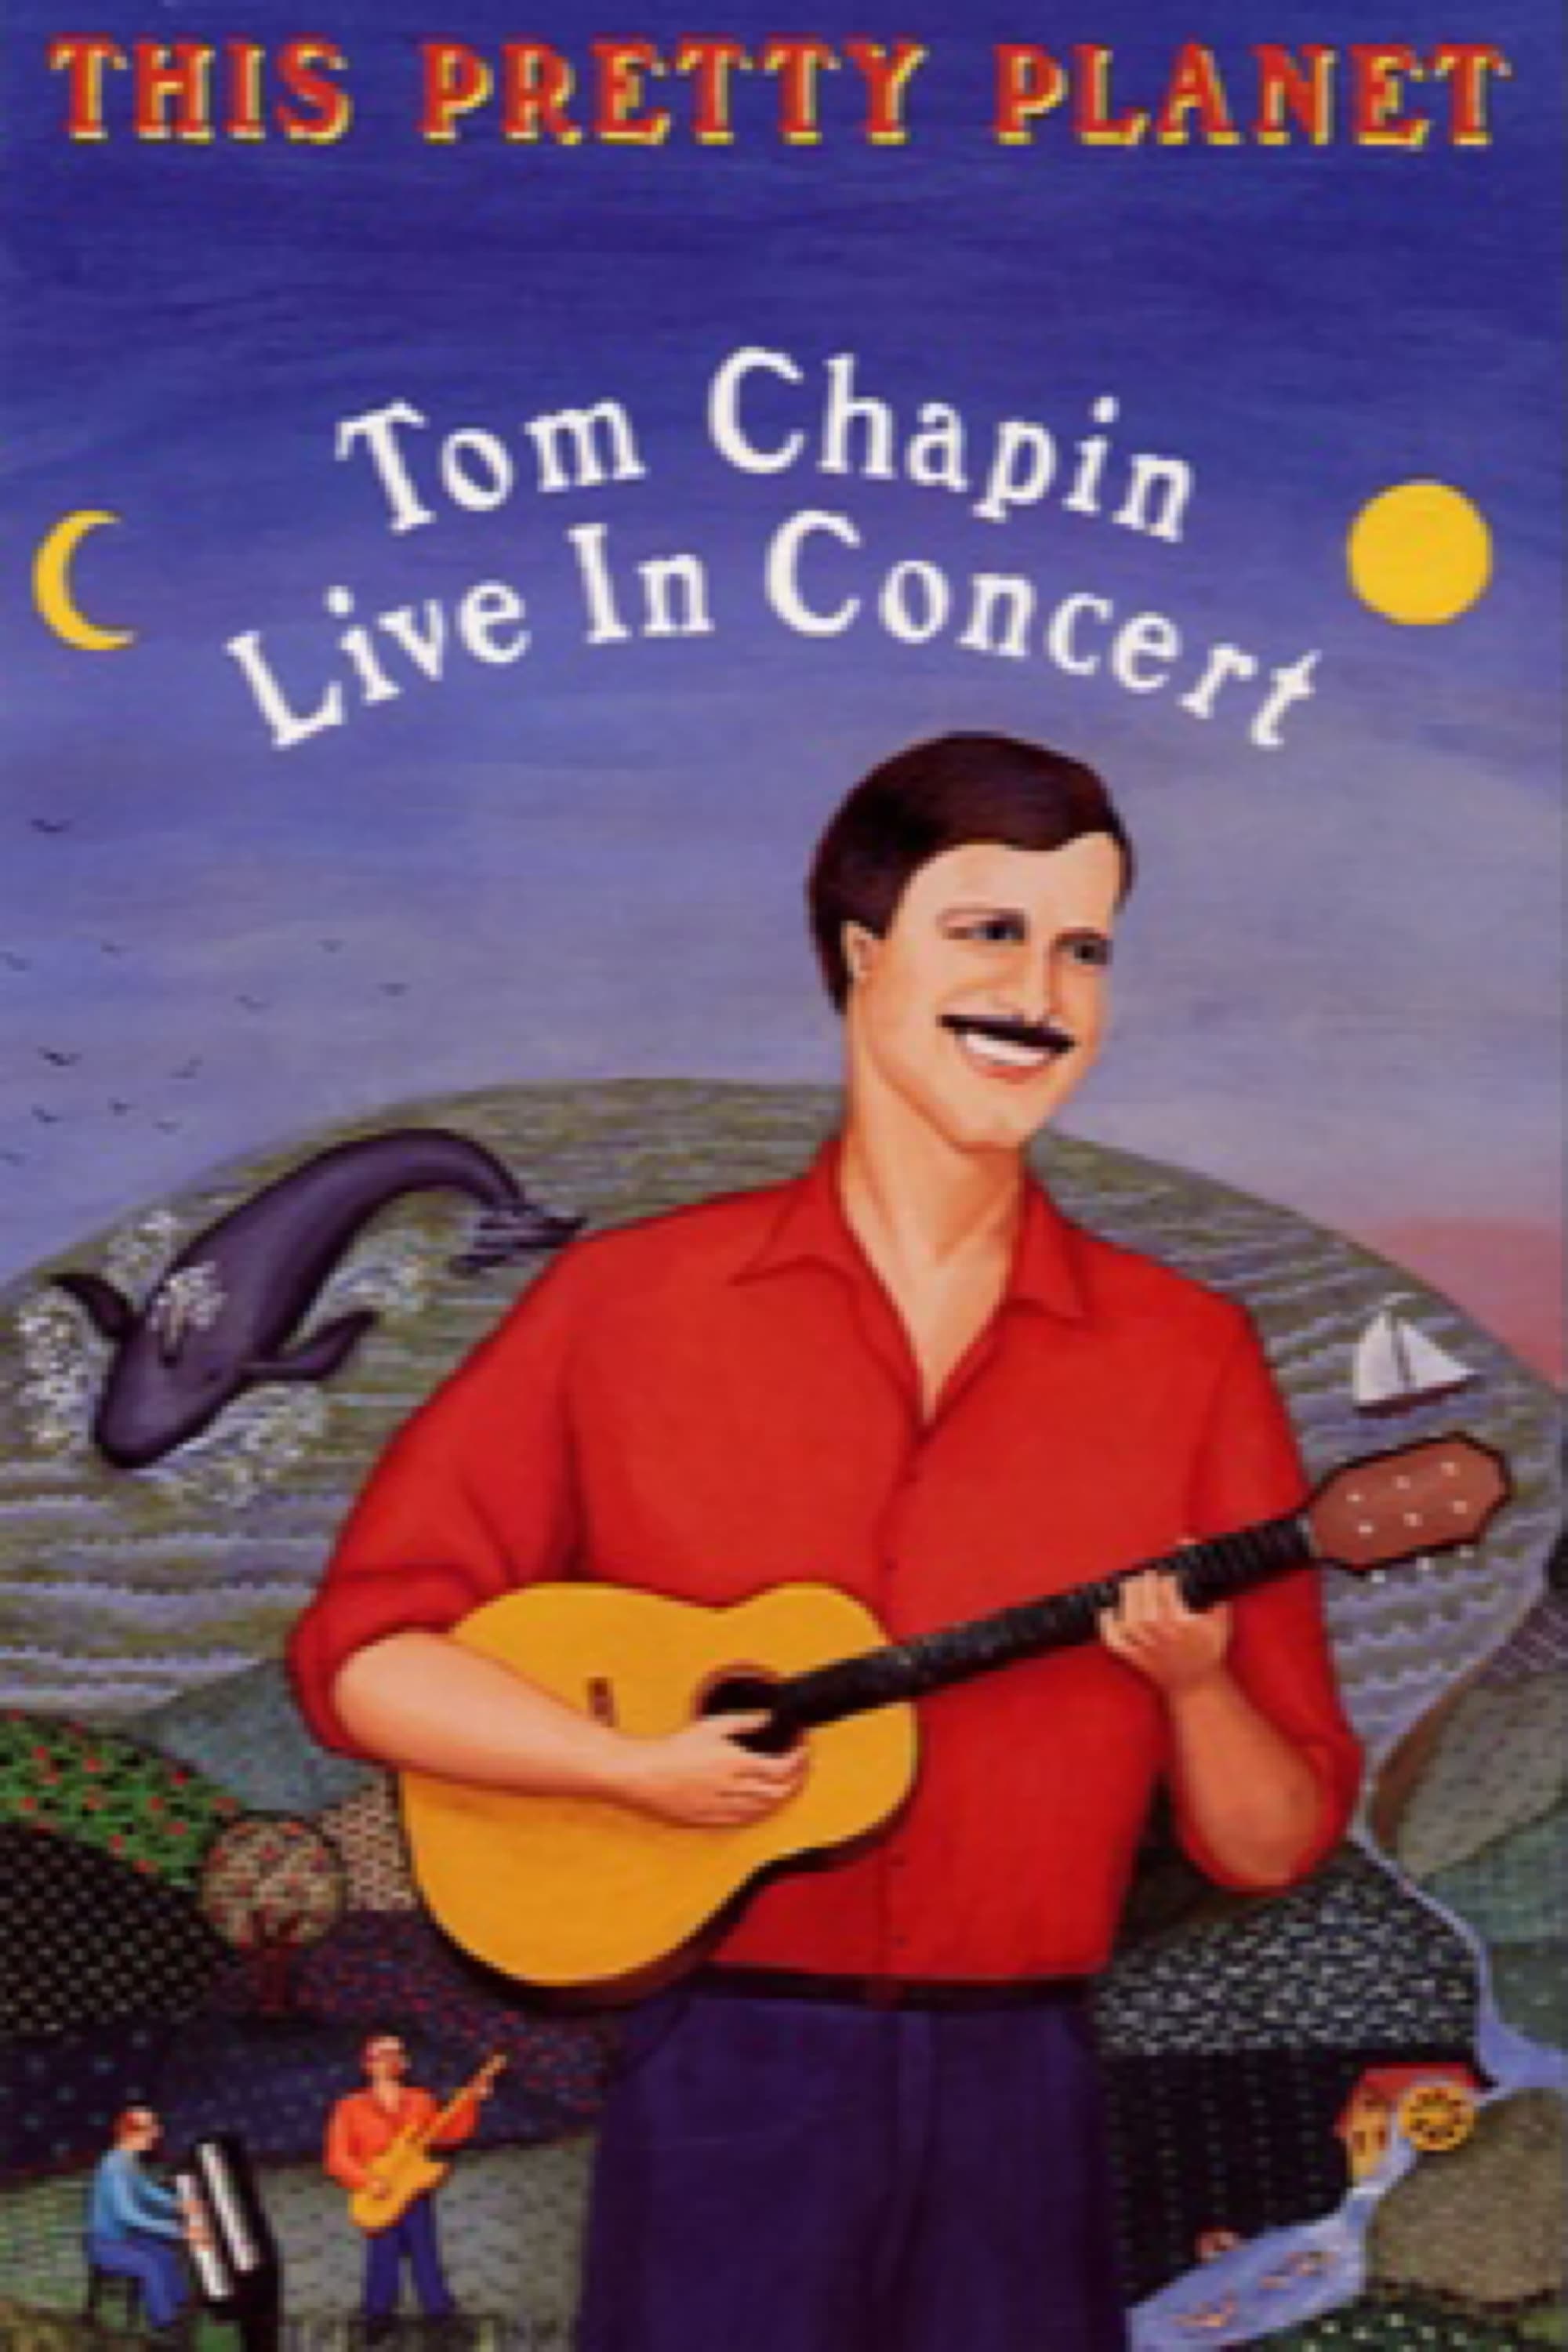 This Pretty Planet: Tom Chapin Live in Concert